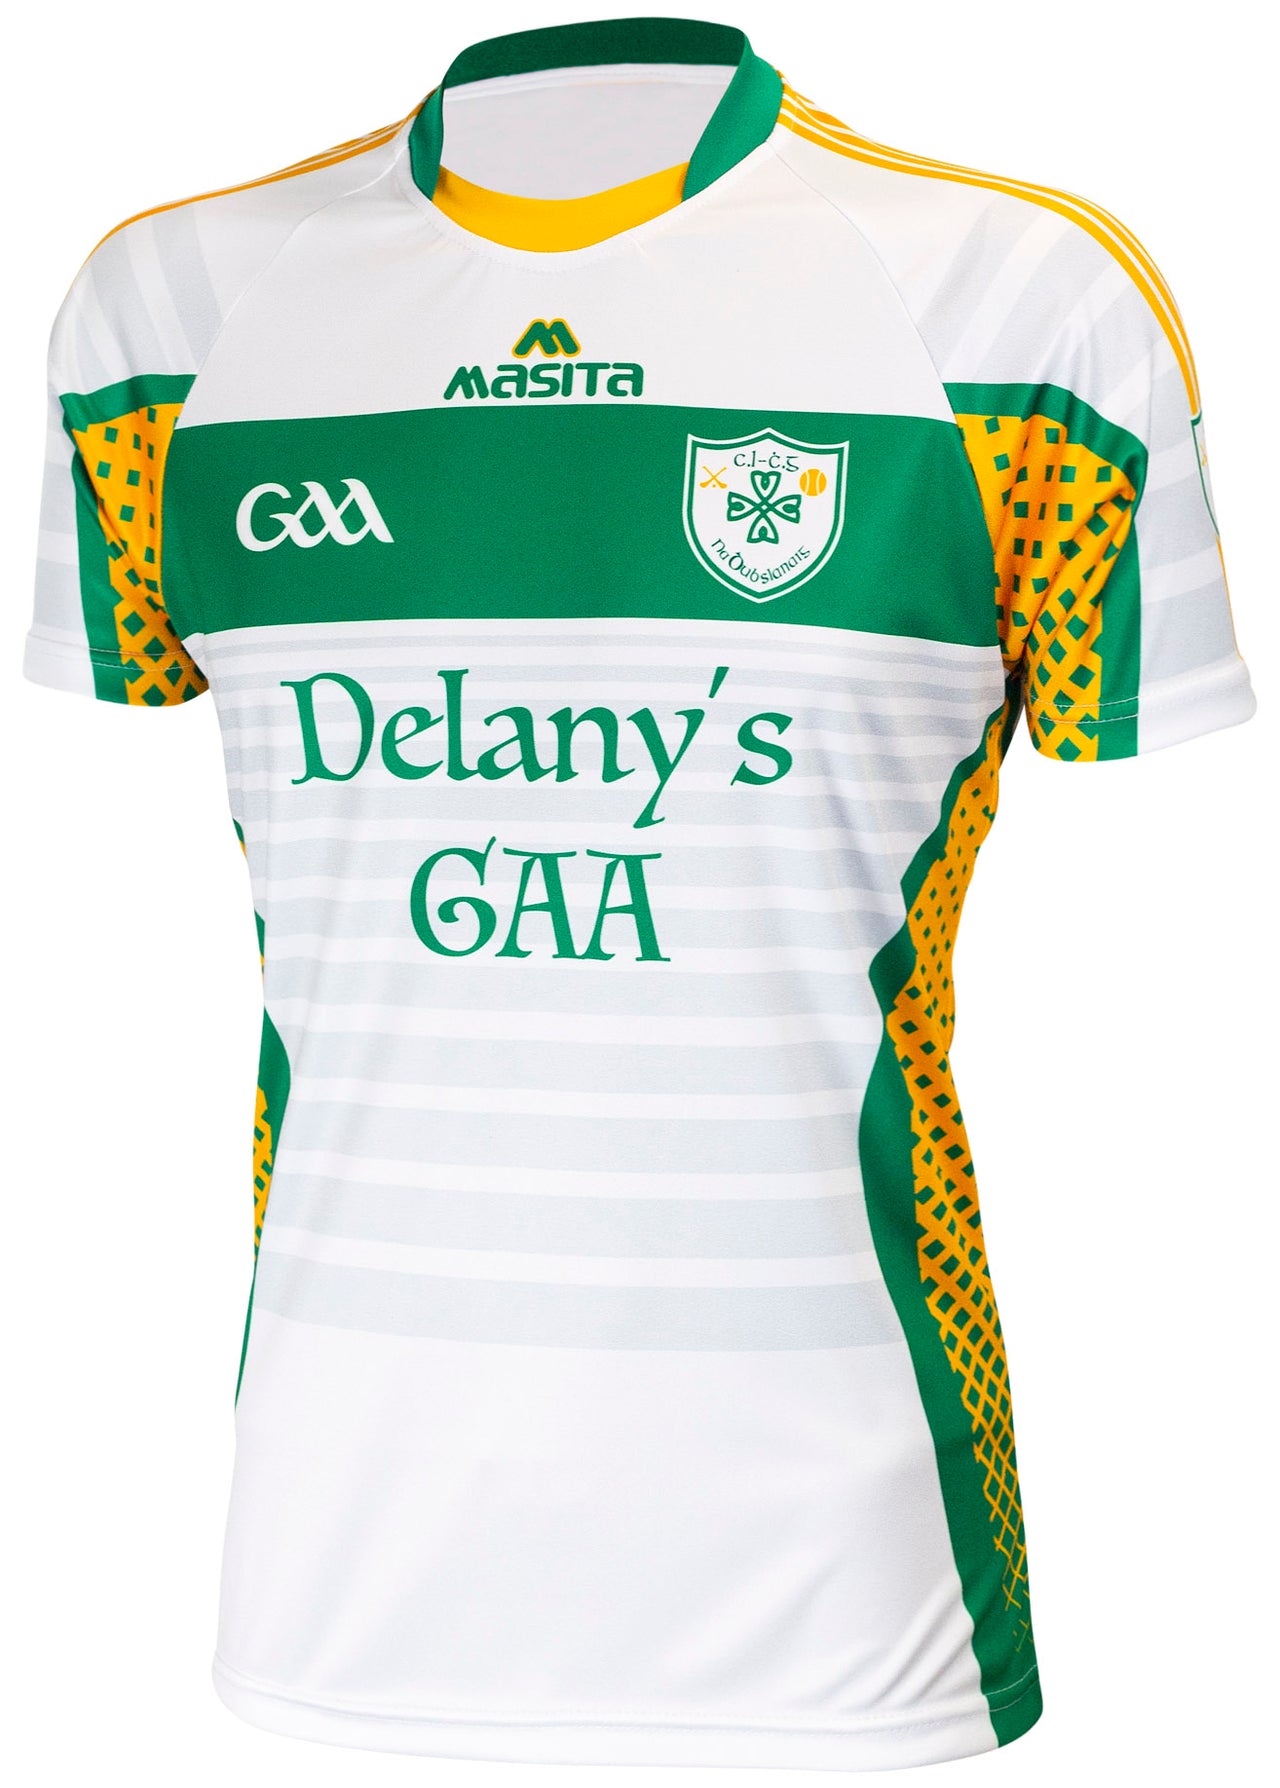 Delanys GAA Home Jersey Regular Fit Adult